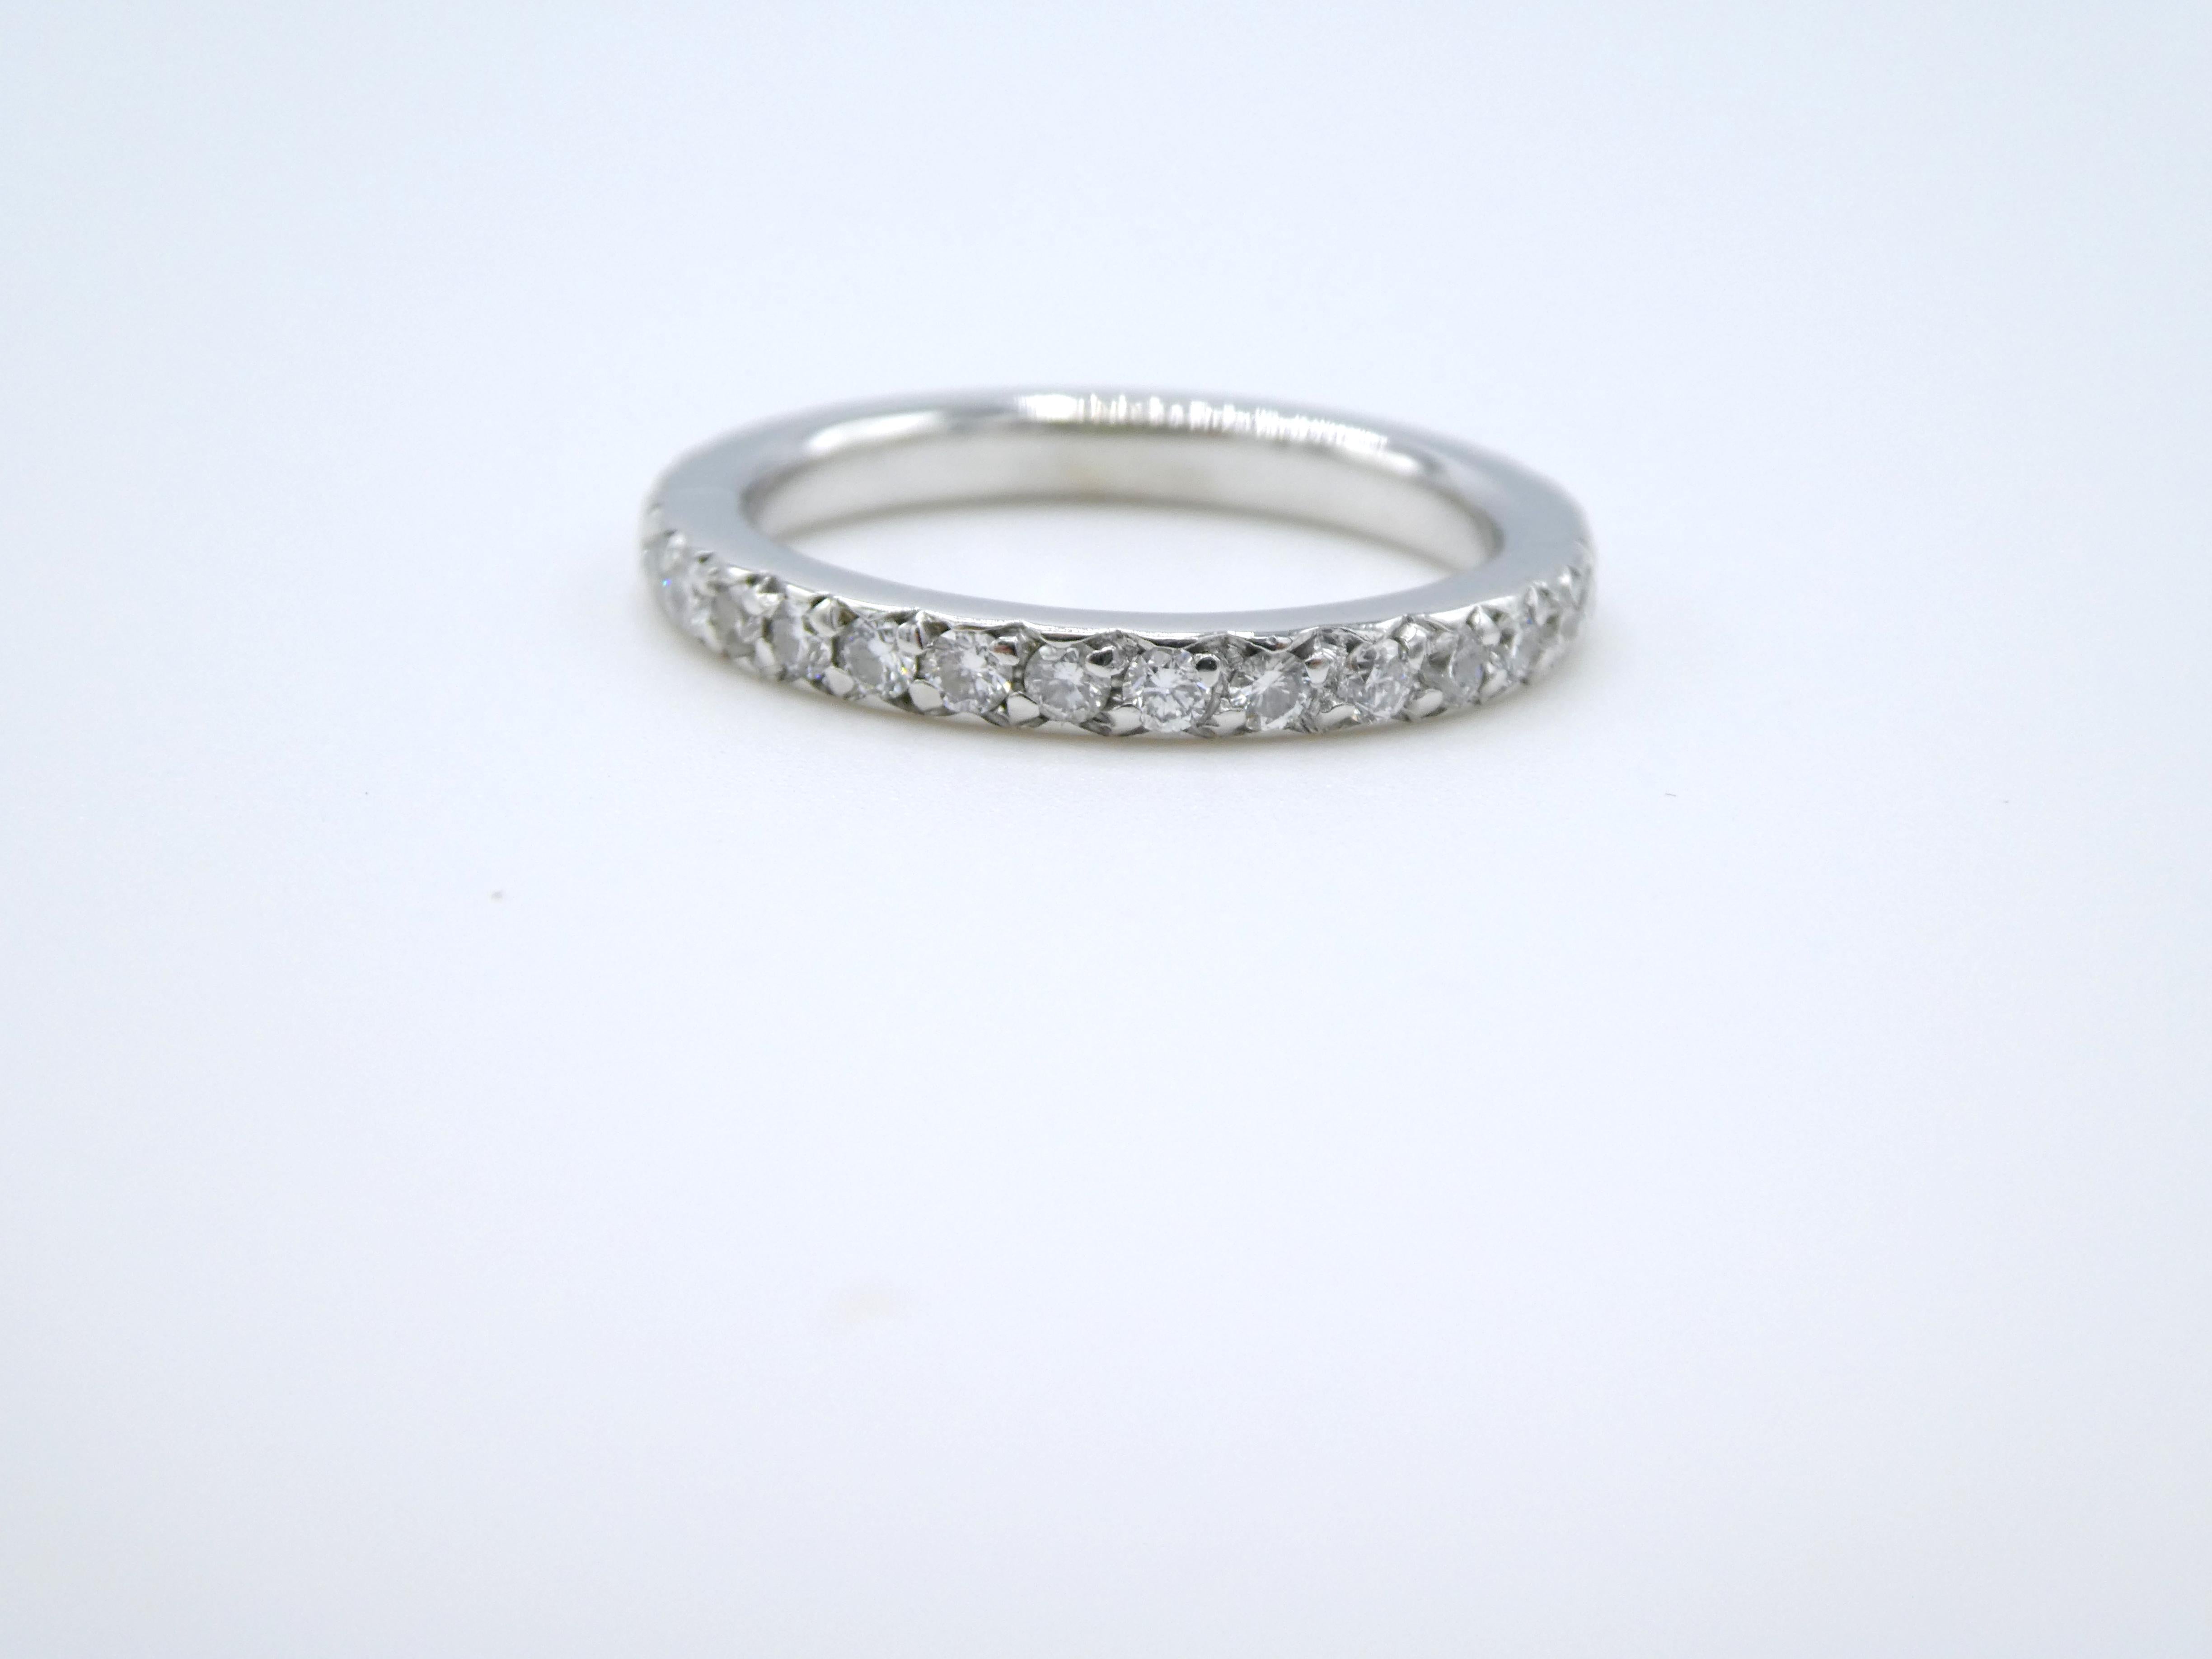 1.00 CTW Natural Diamond 14K White Gold Round Eternity Band Size 5.75

Metal: 14K White Gold
Weight: 2.94 grams
Diamonds: 32 round brilliant cut natural diamonds, approx. 1 CTW G-H SI
Size: 5.75
Band is 2.4mm wide
Recently polished